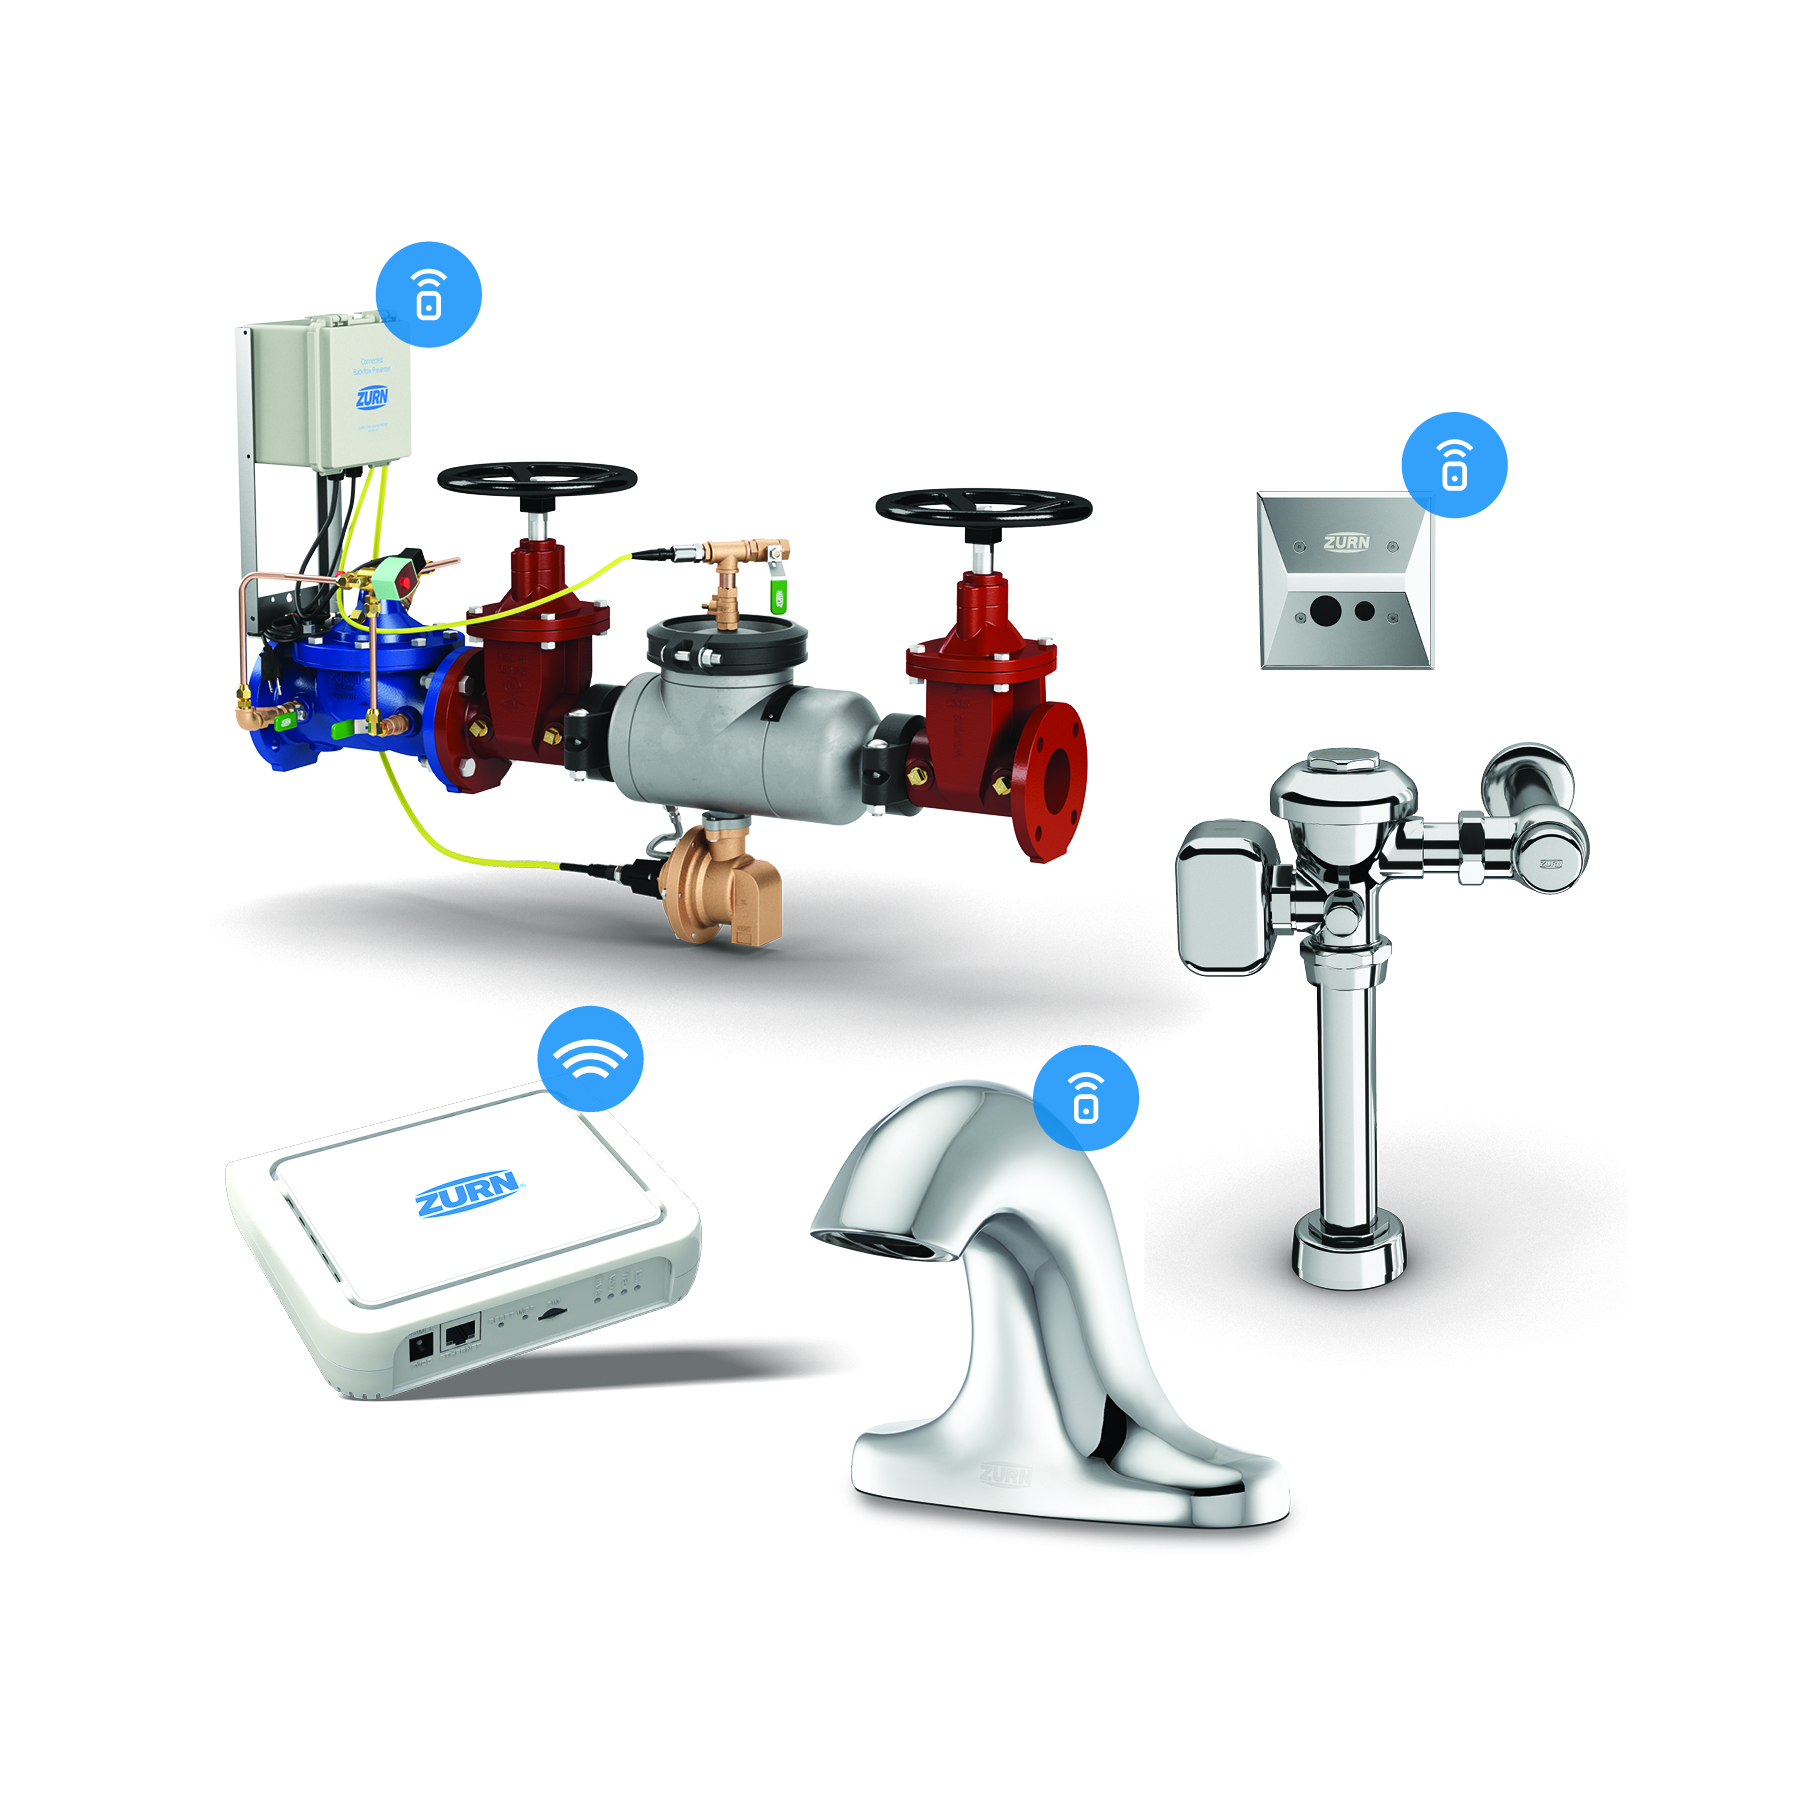 Within any business, setbacks happen. But what if you could respond faster to prevent them in the first place? Zurn Connected Products let you take control, no matter where you are, through real-time insights and performance trends of your plumbing solutions. 